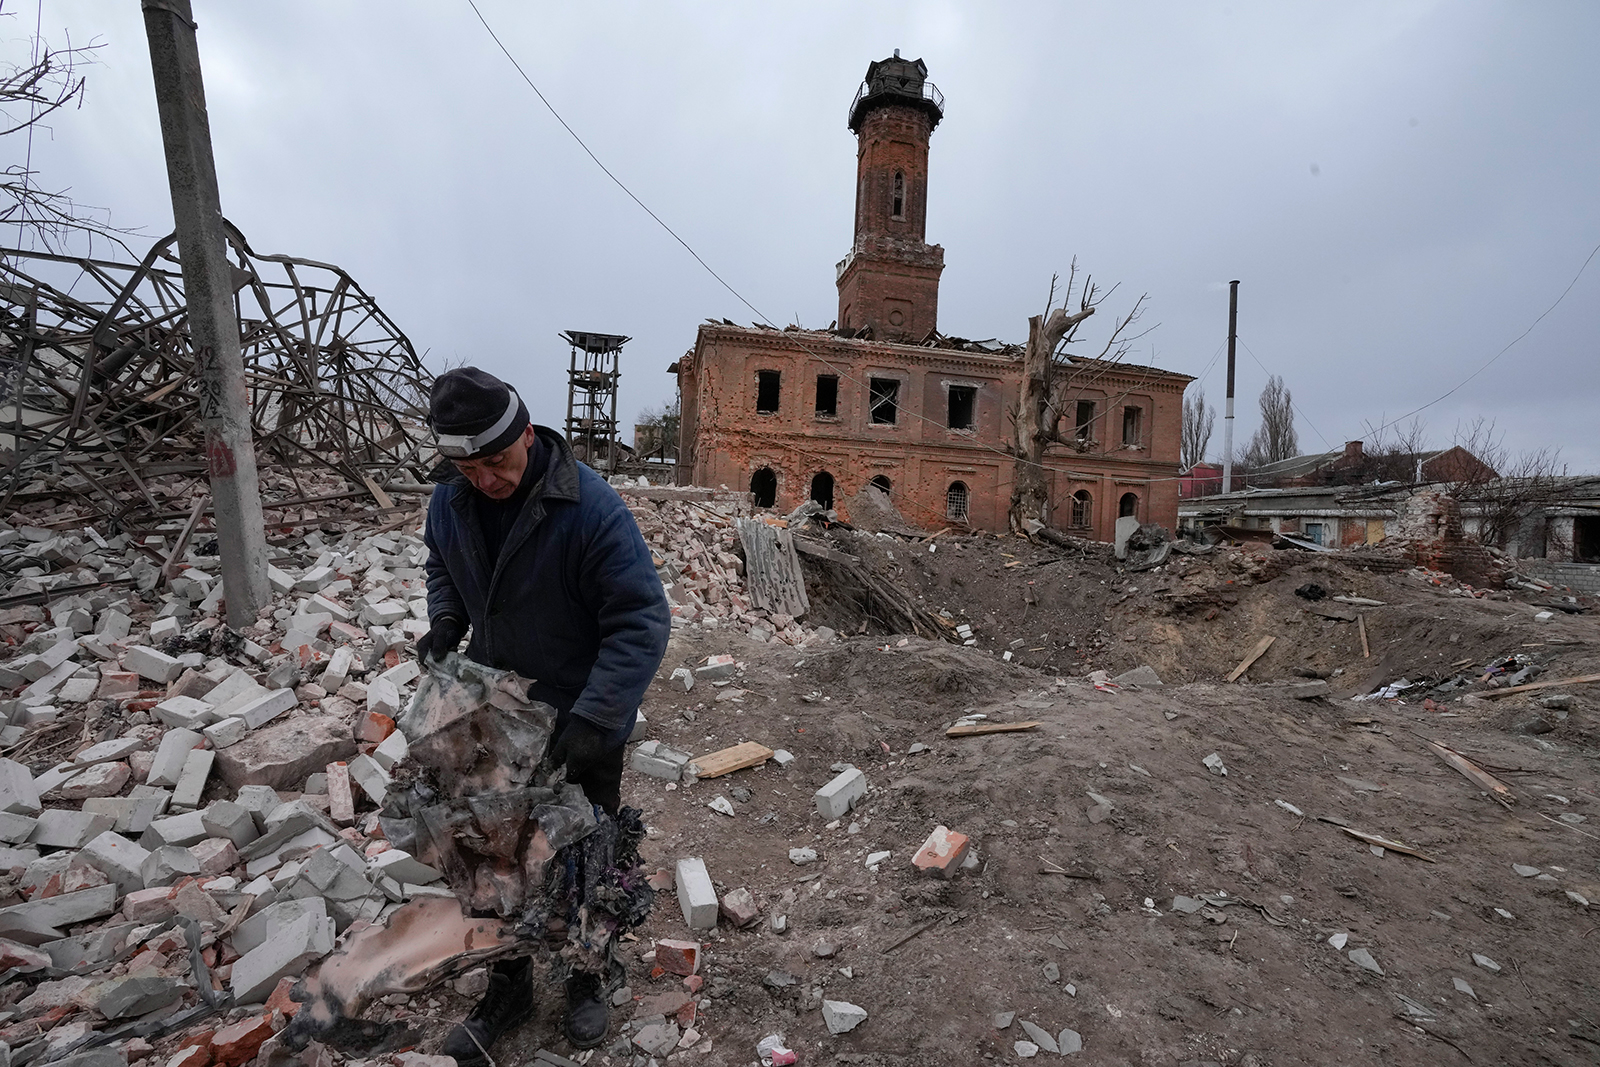 A man holds fragments of a rocket launched by the Russian forces at night, a rocket crater behind him, in the center of Kharkiv, Ukraine, on Sunday, March 27.